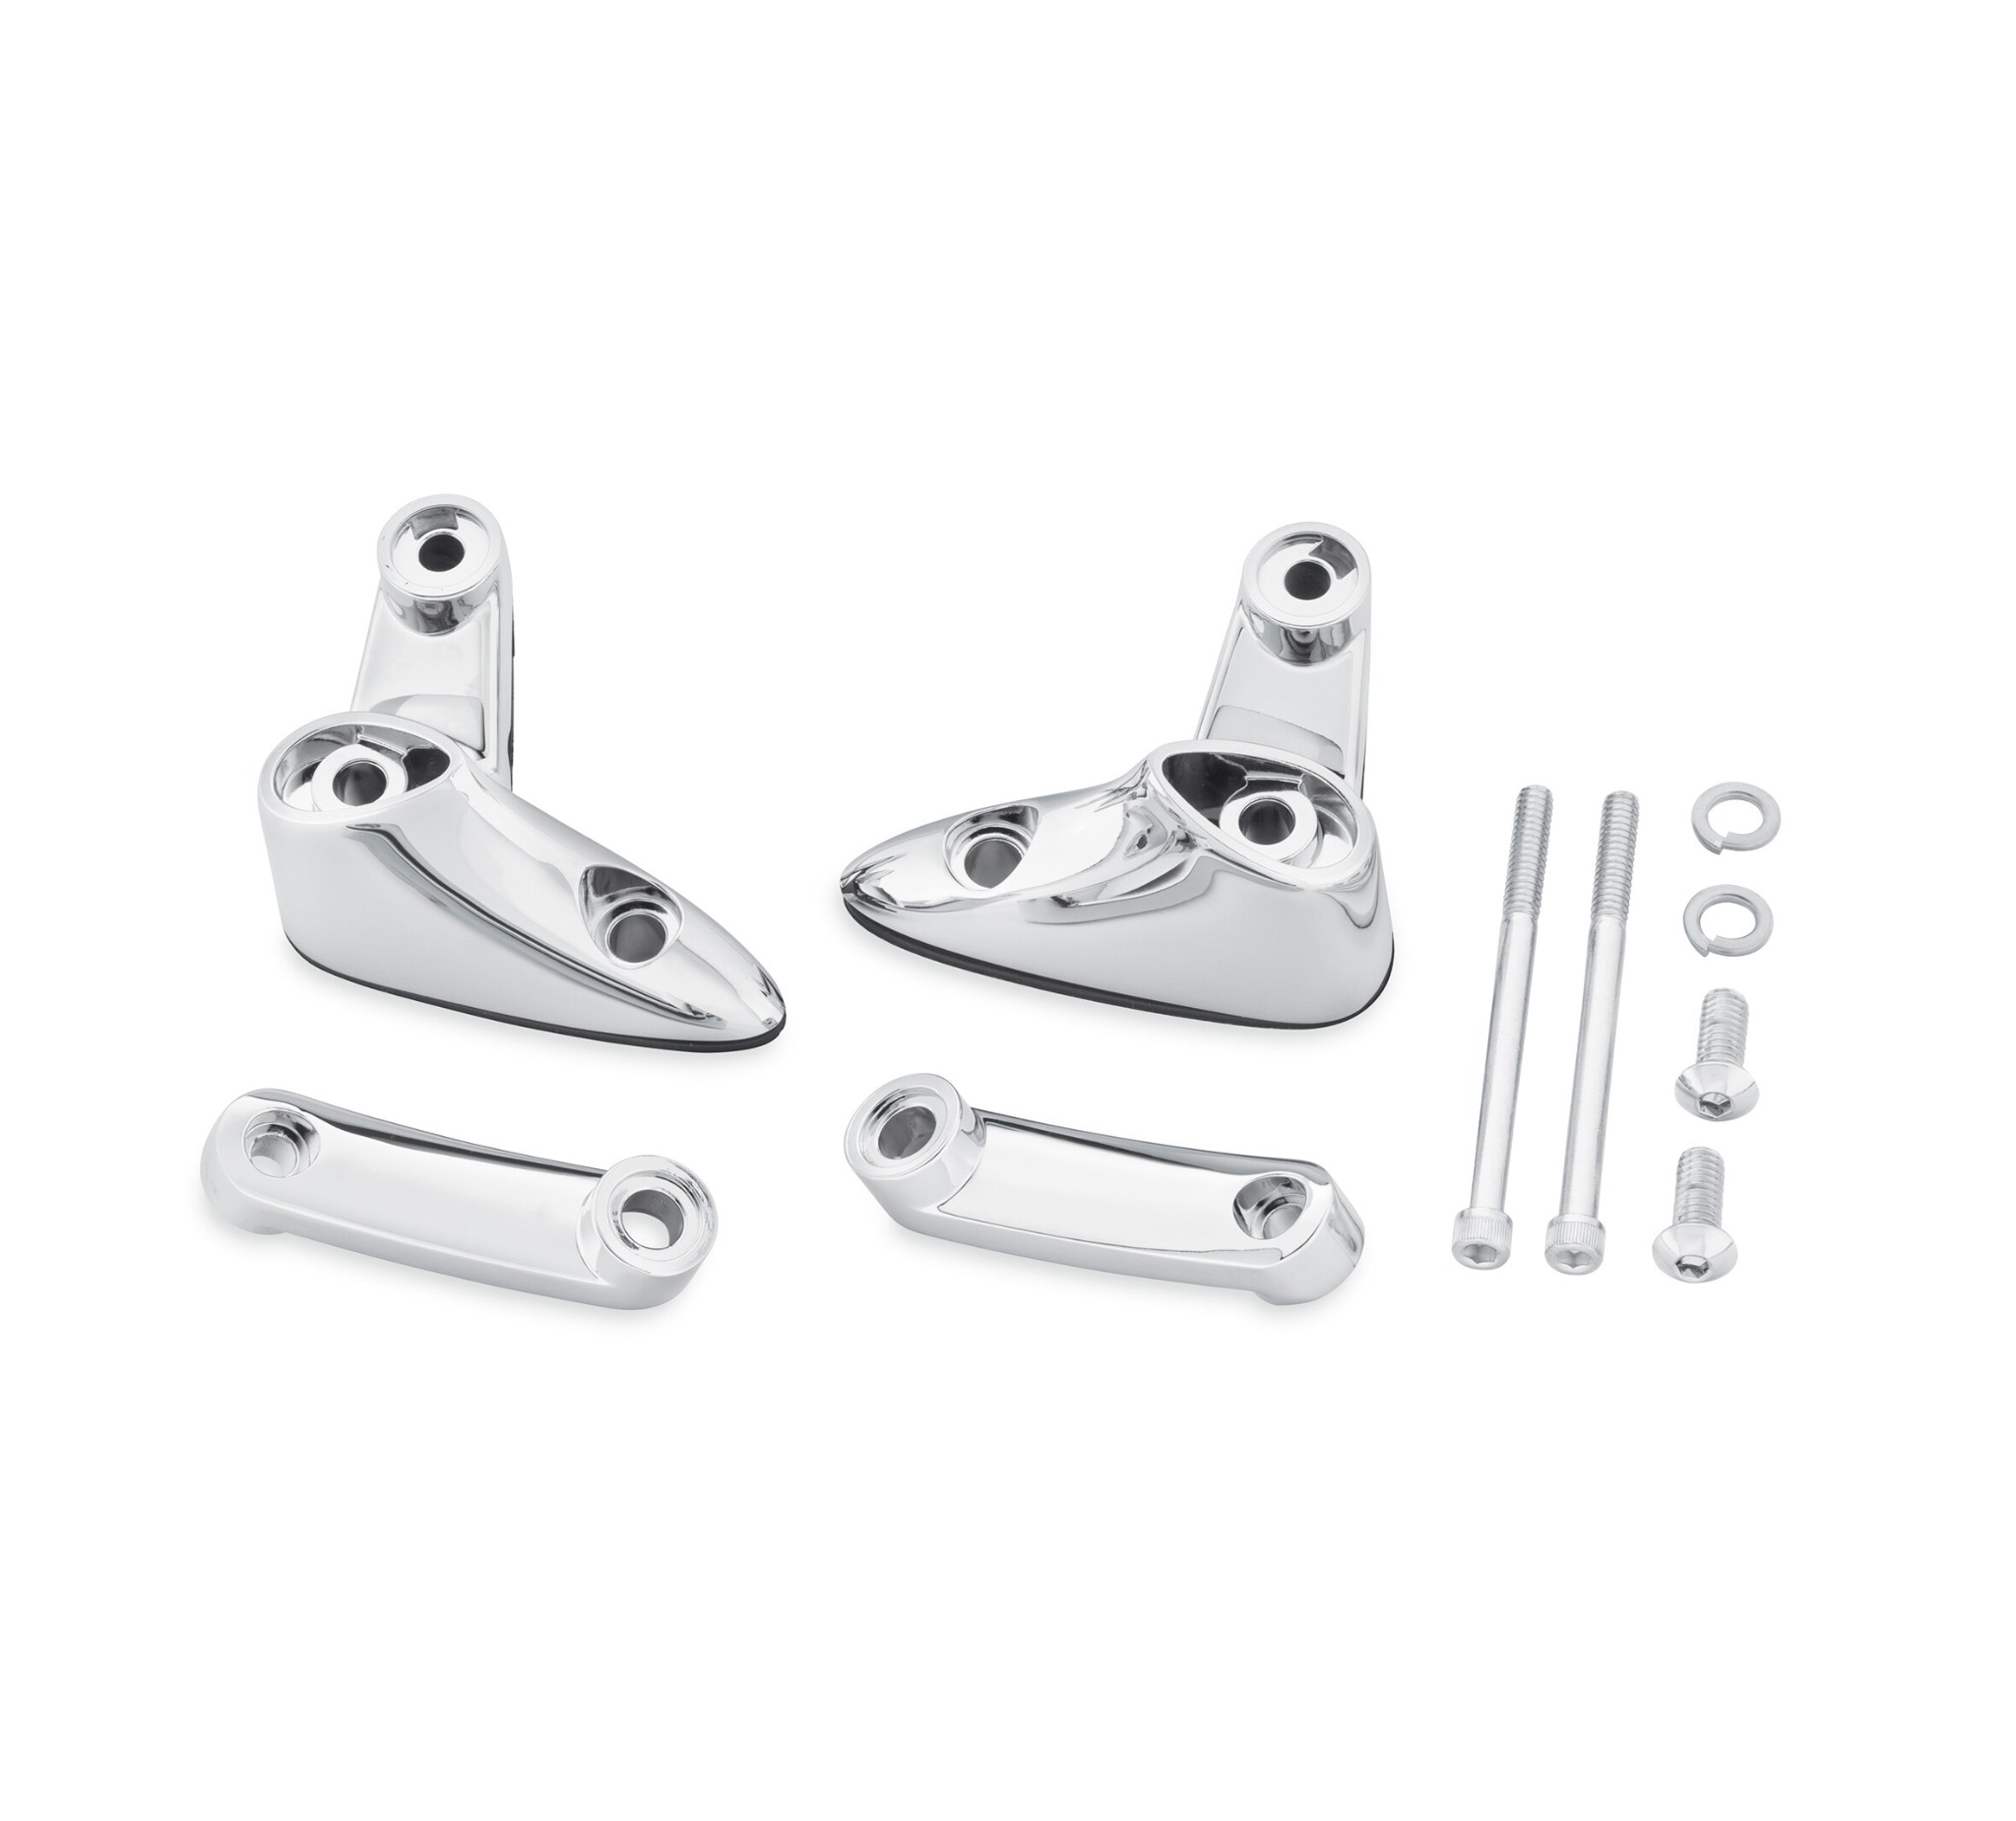 Harley Foot peg Driver Pilot Male Mount-Style Footpegs Fit For Harley  Davidson Touring Softail Dyna Sportster Chrome : : Car & Motorbike